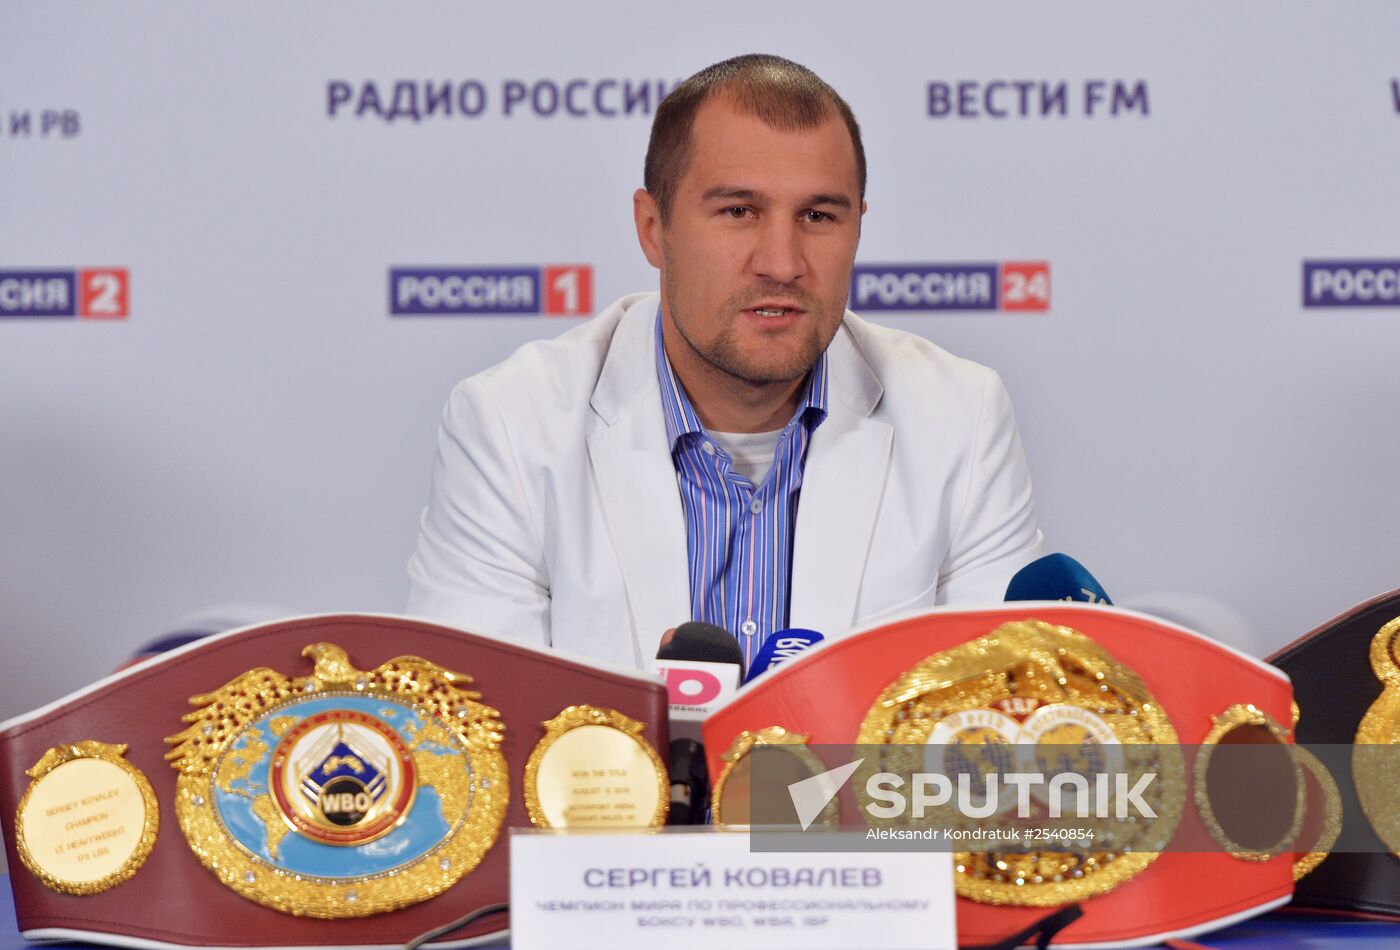 Boxing. News conference by Sergei Kovalyov